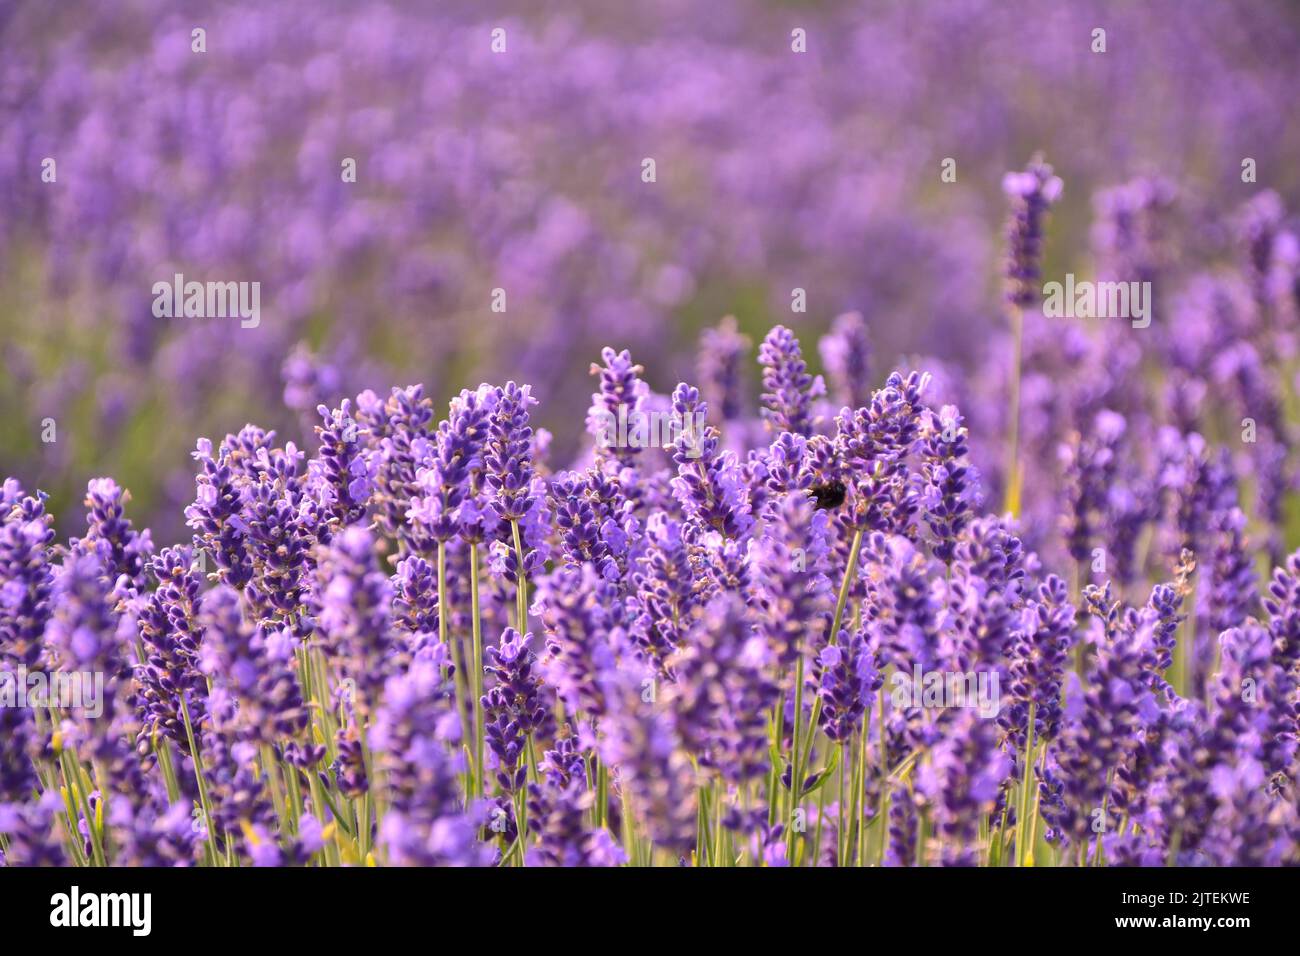 Lavender flowers field background. Selective focus. Stock Photo